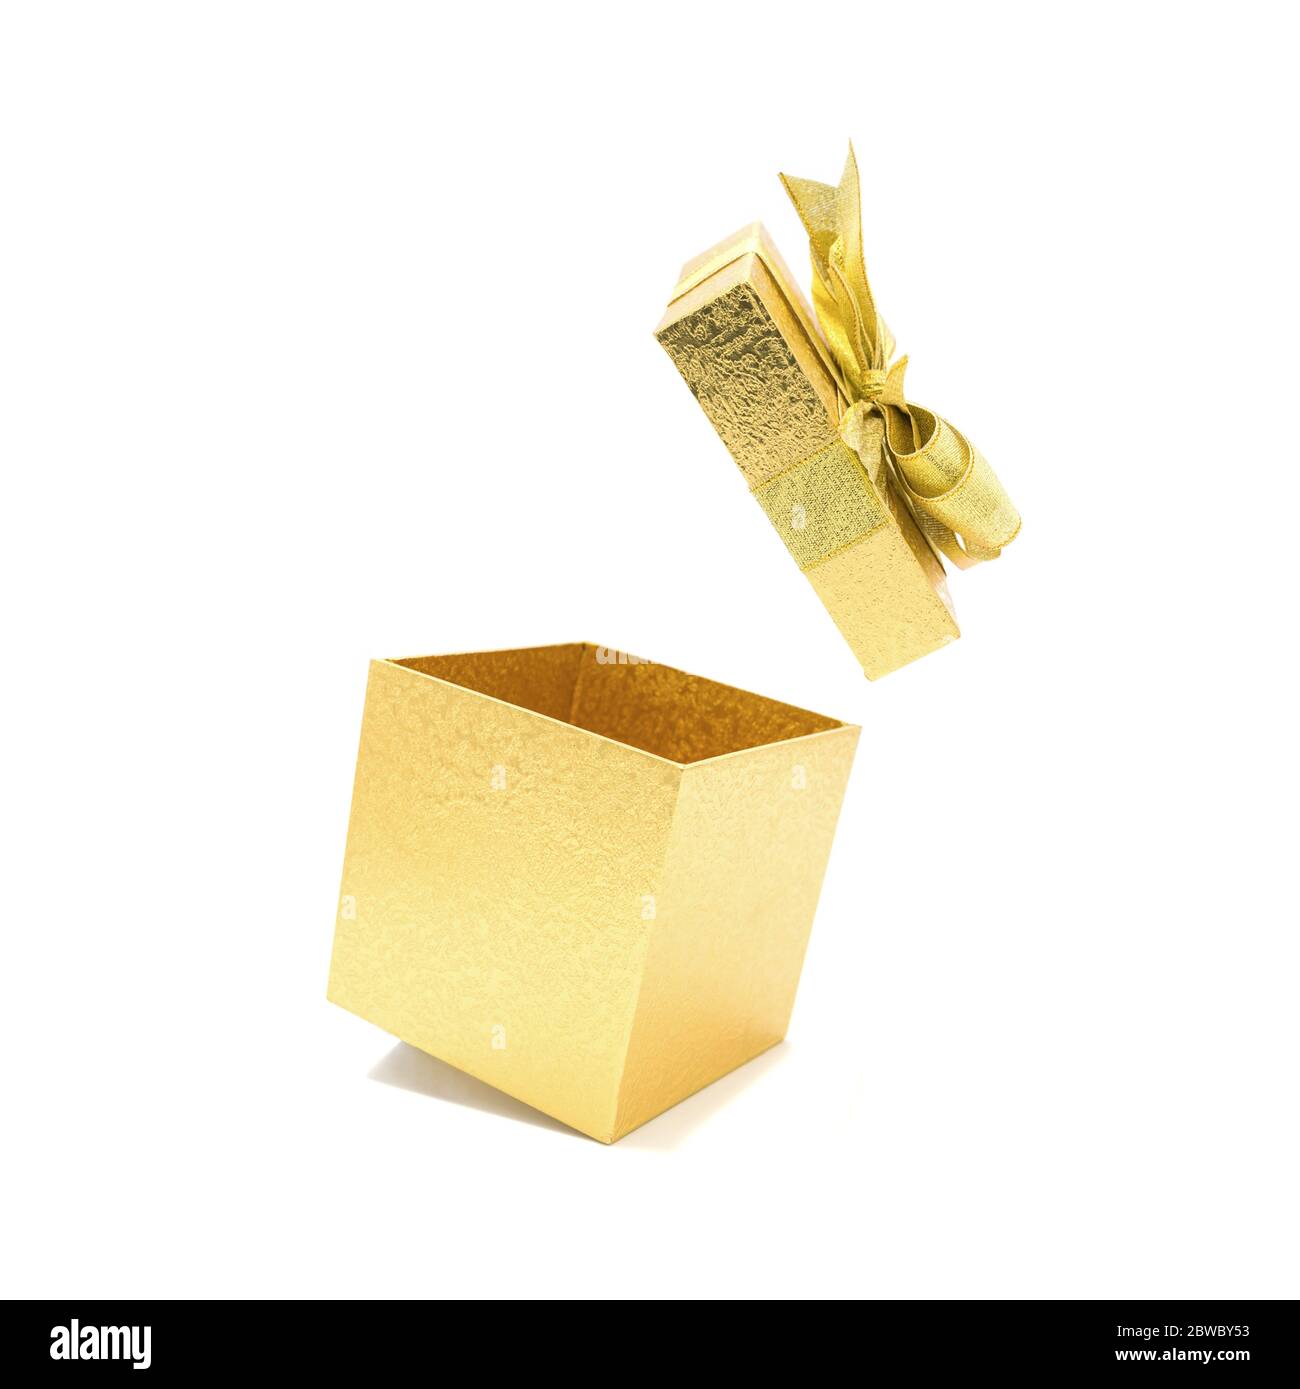 Open empty gold gift box isolated on white background. Stock Photo